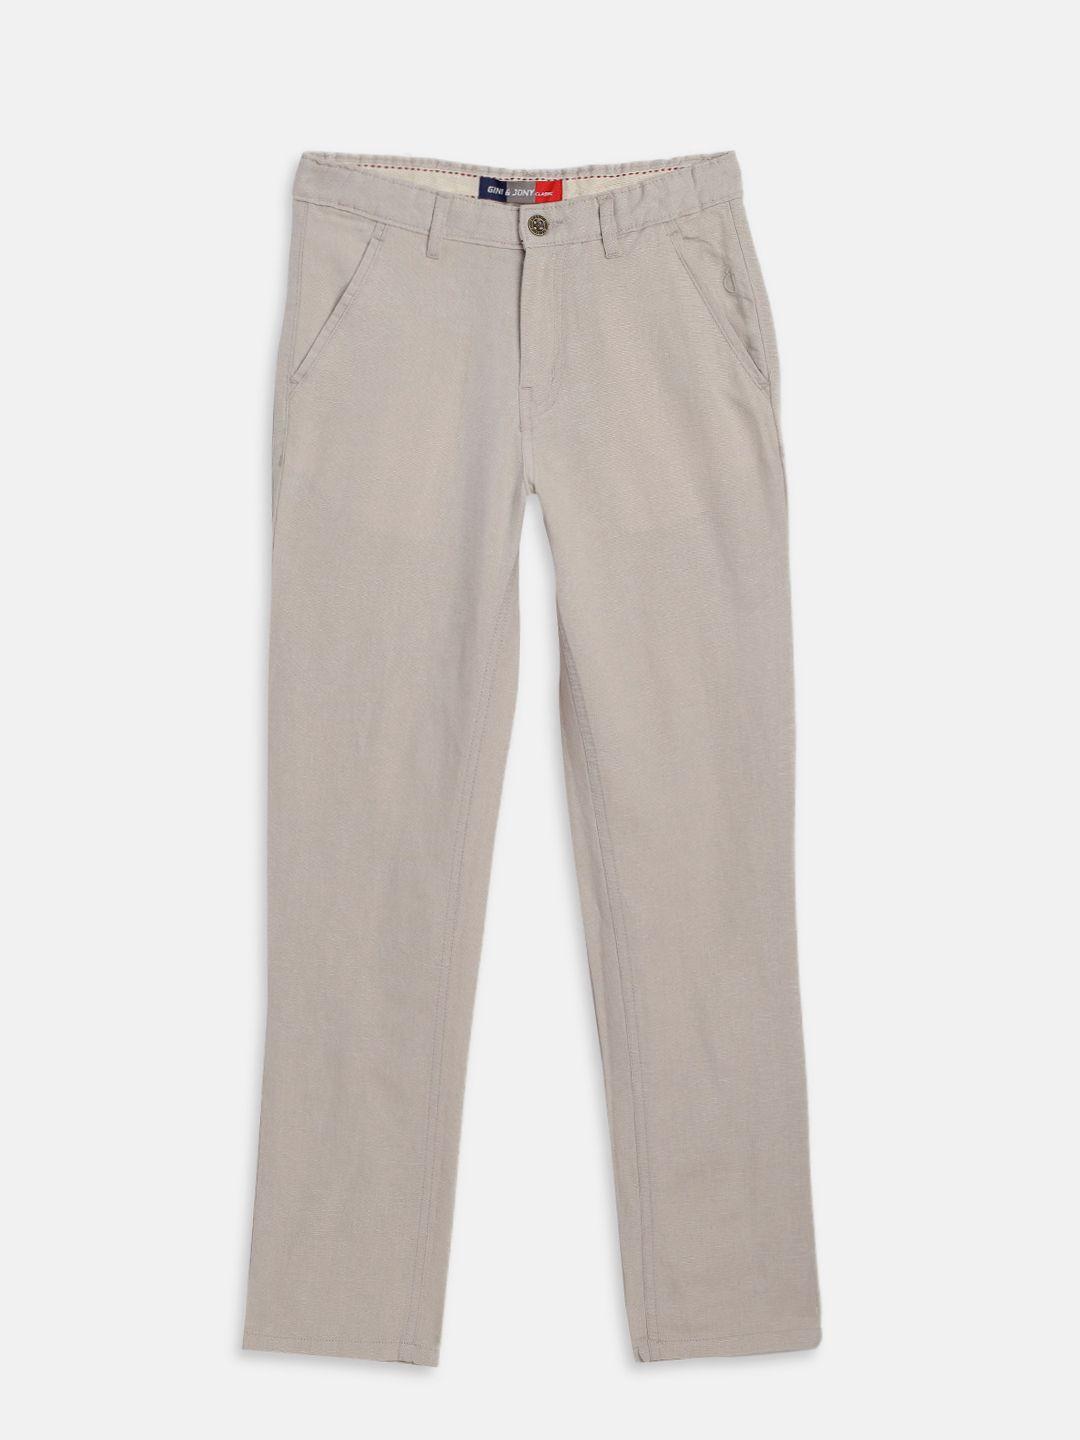 gini-and-jony-boys-off-white-regular-fit-solid-regular-trousers